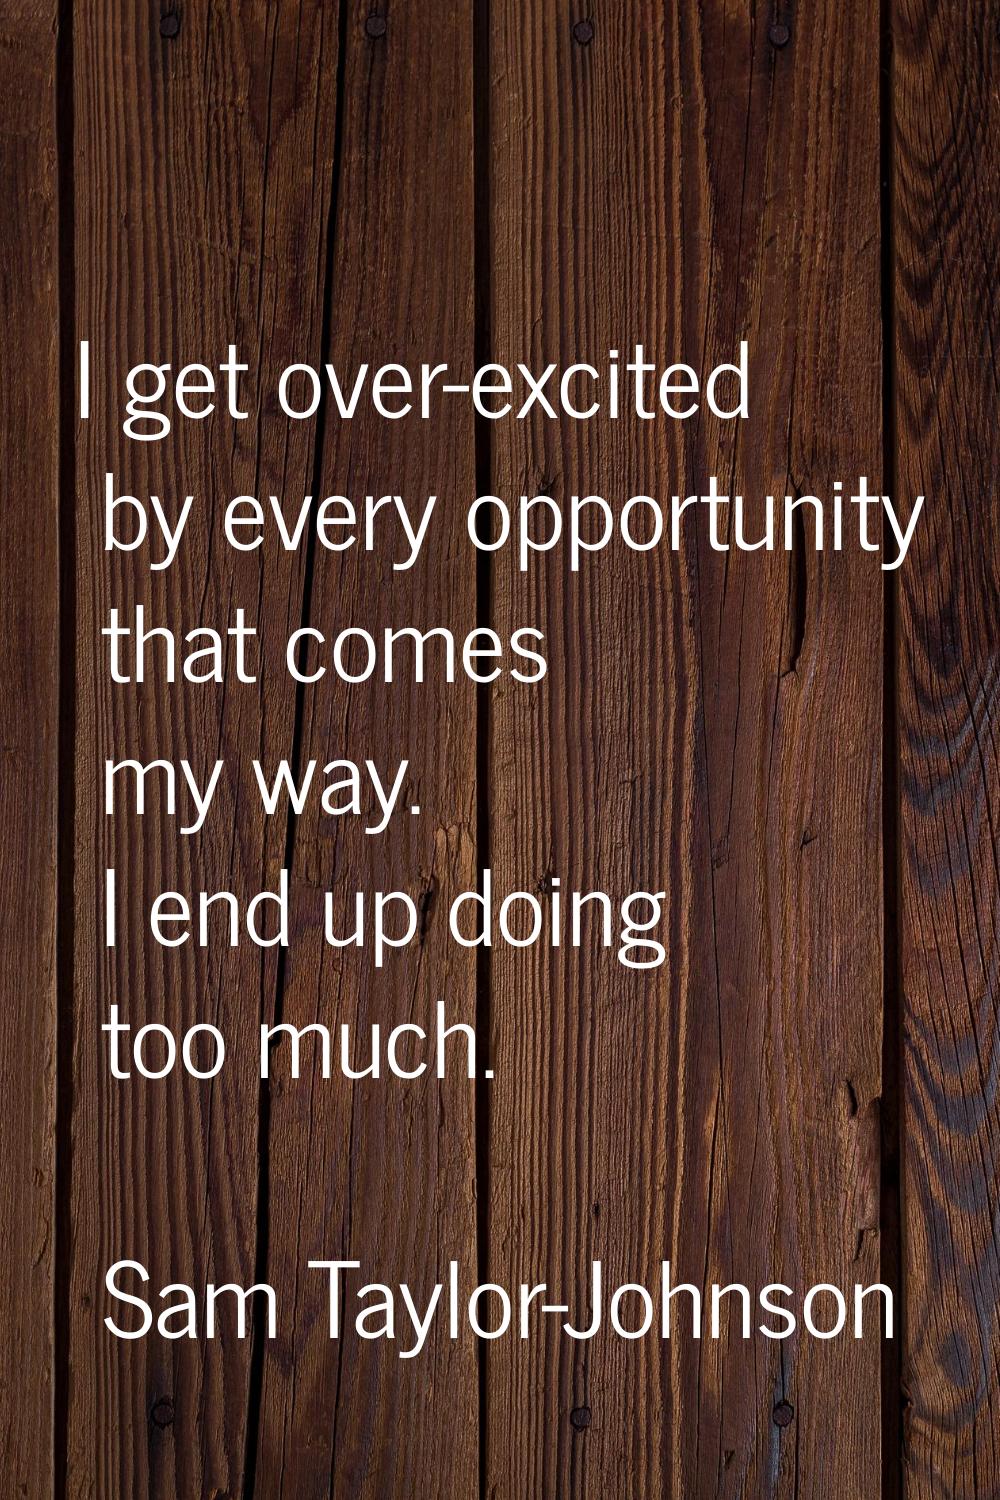 I get over-excited by every opportunity that comes my way. I end up doing too much.